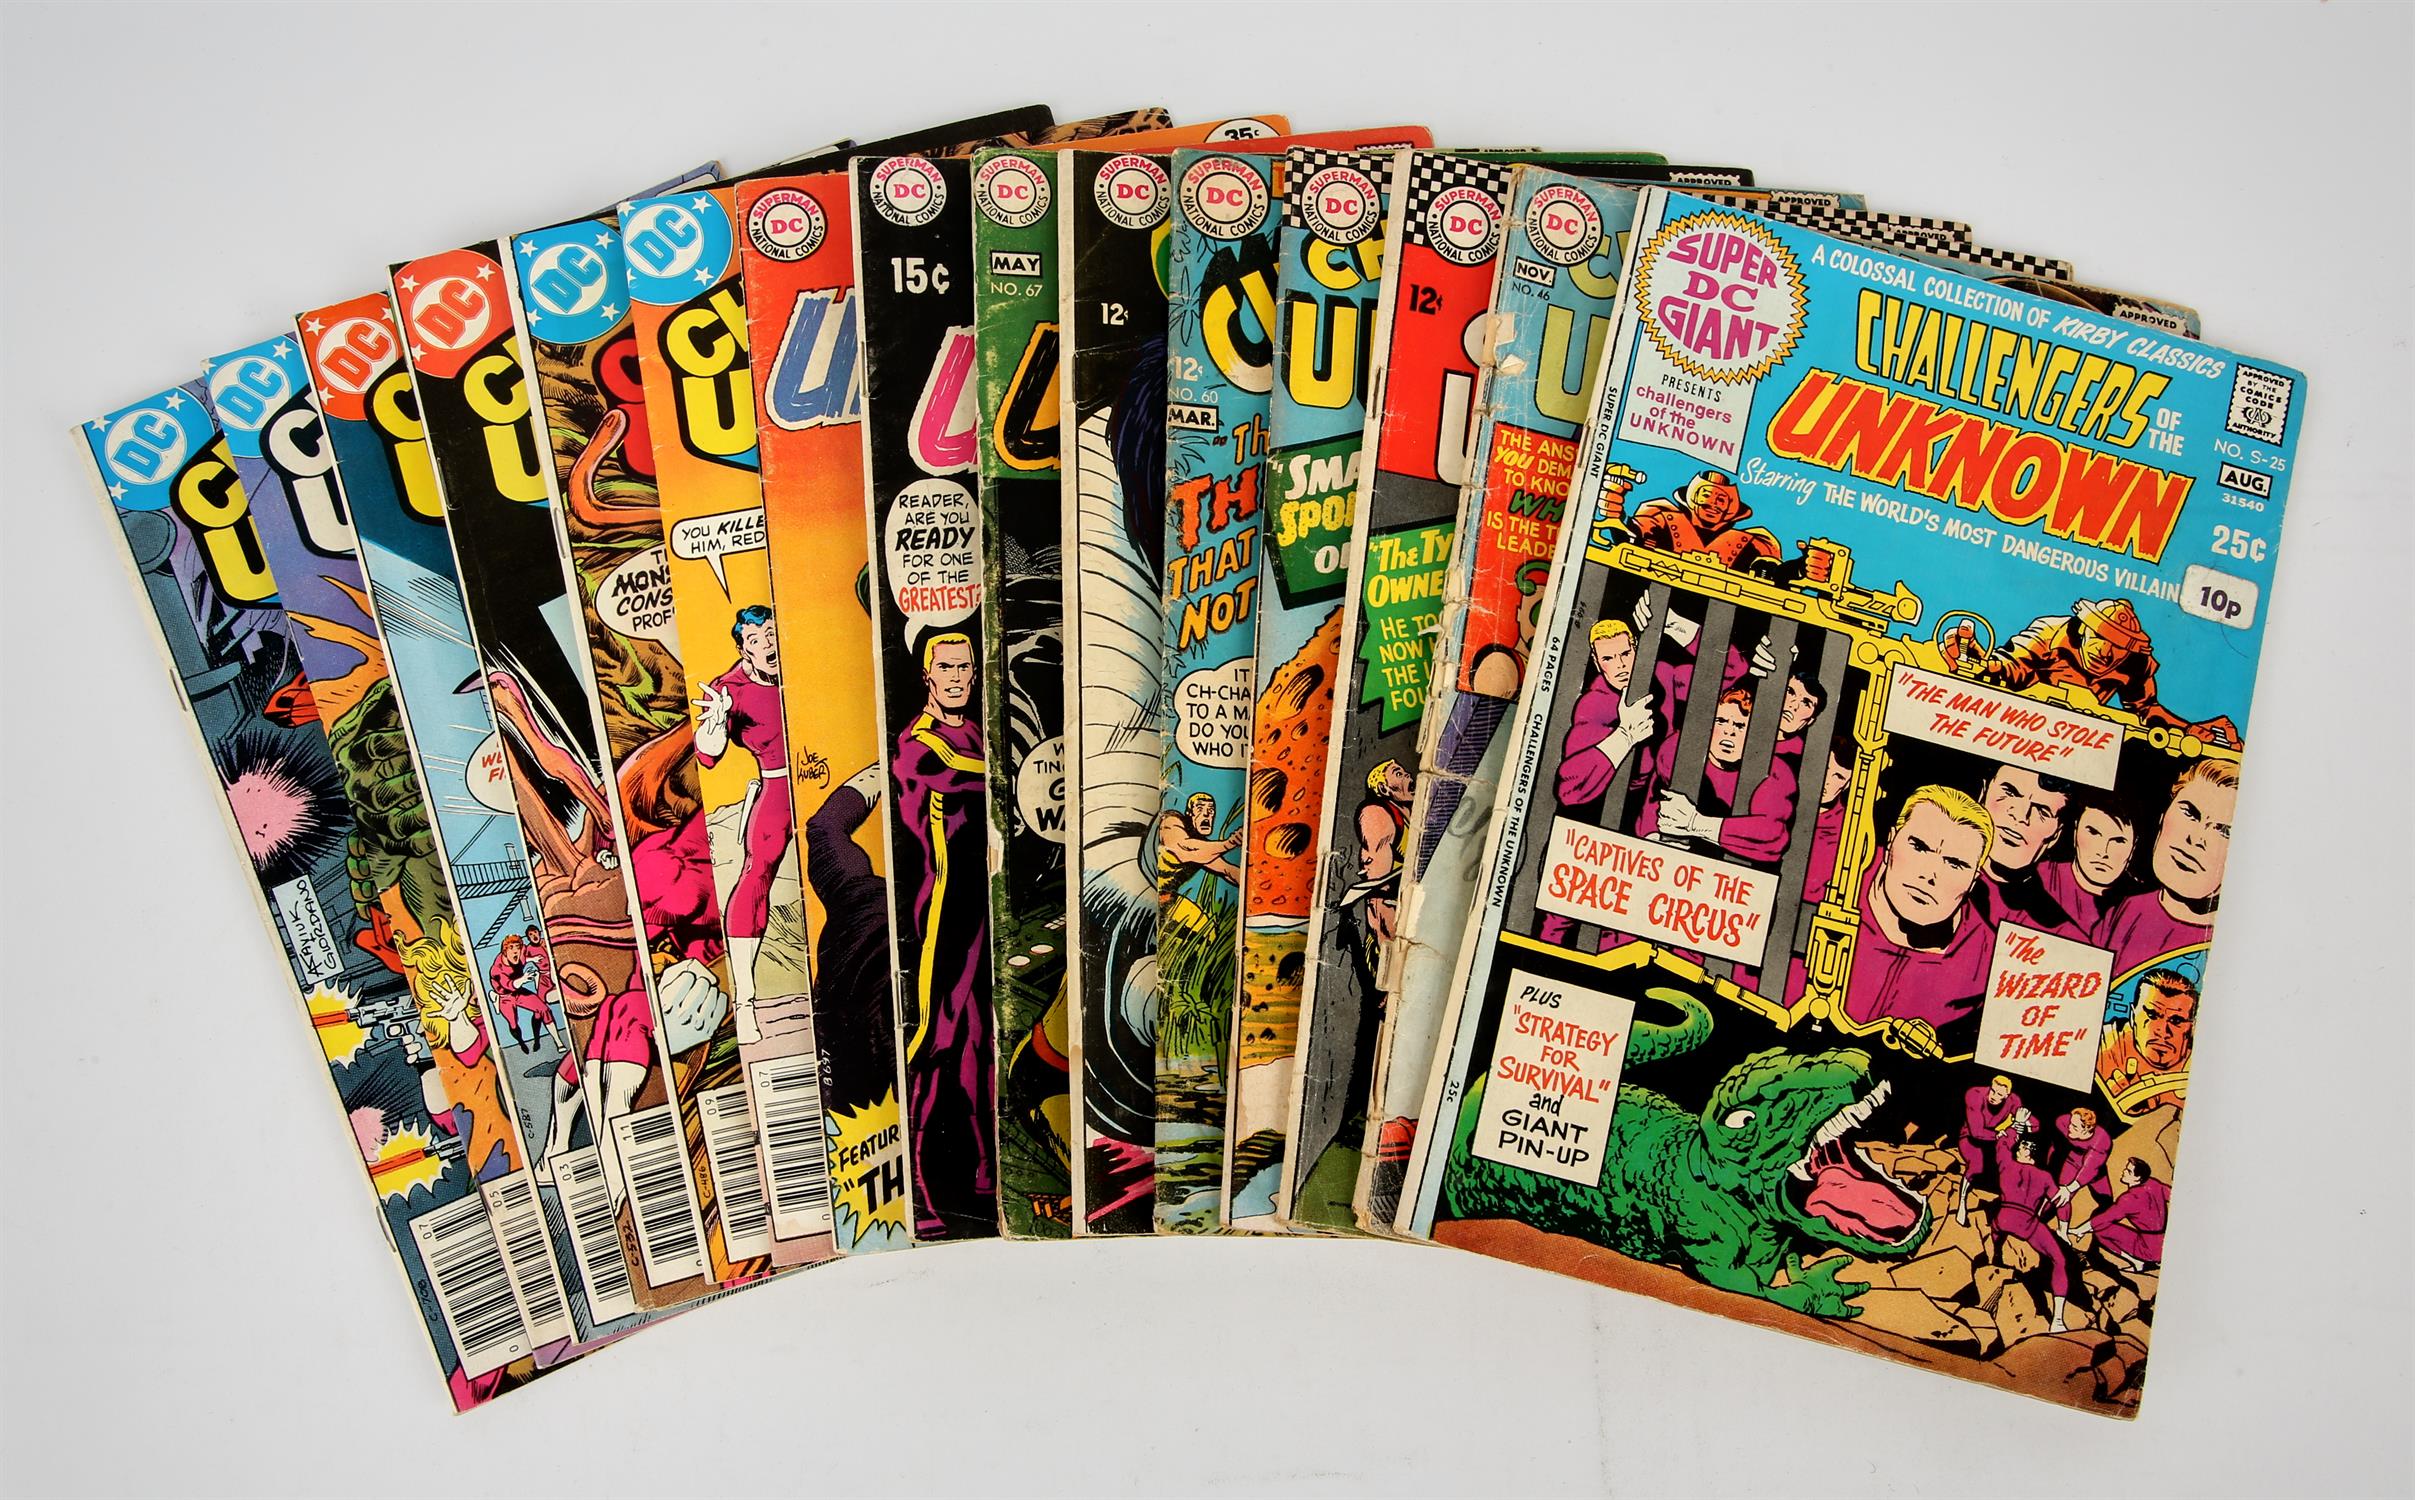 Challengers of the Unknown: a group of 15 Issues (DC Comics, 1965 onwards). This lot